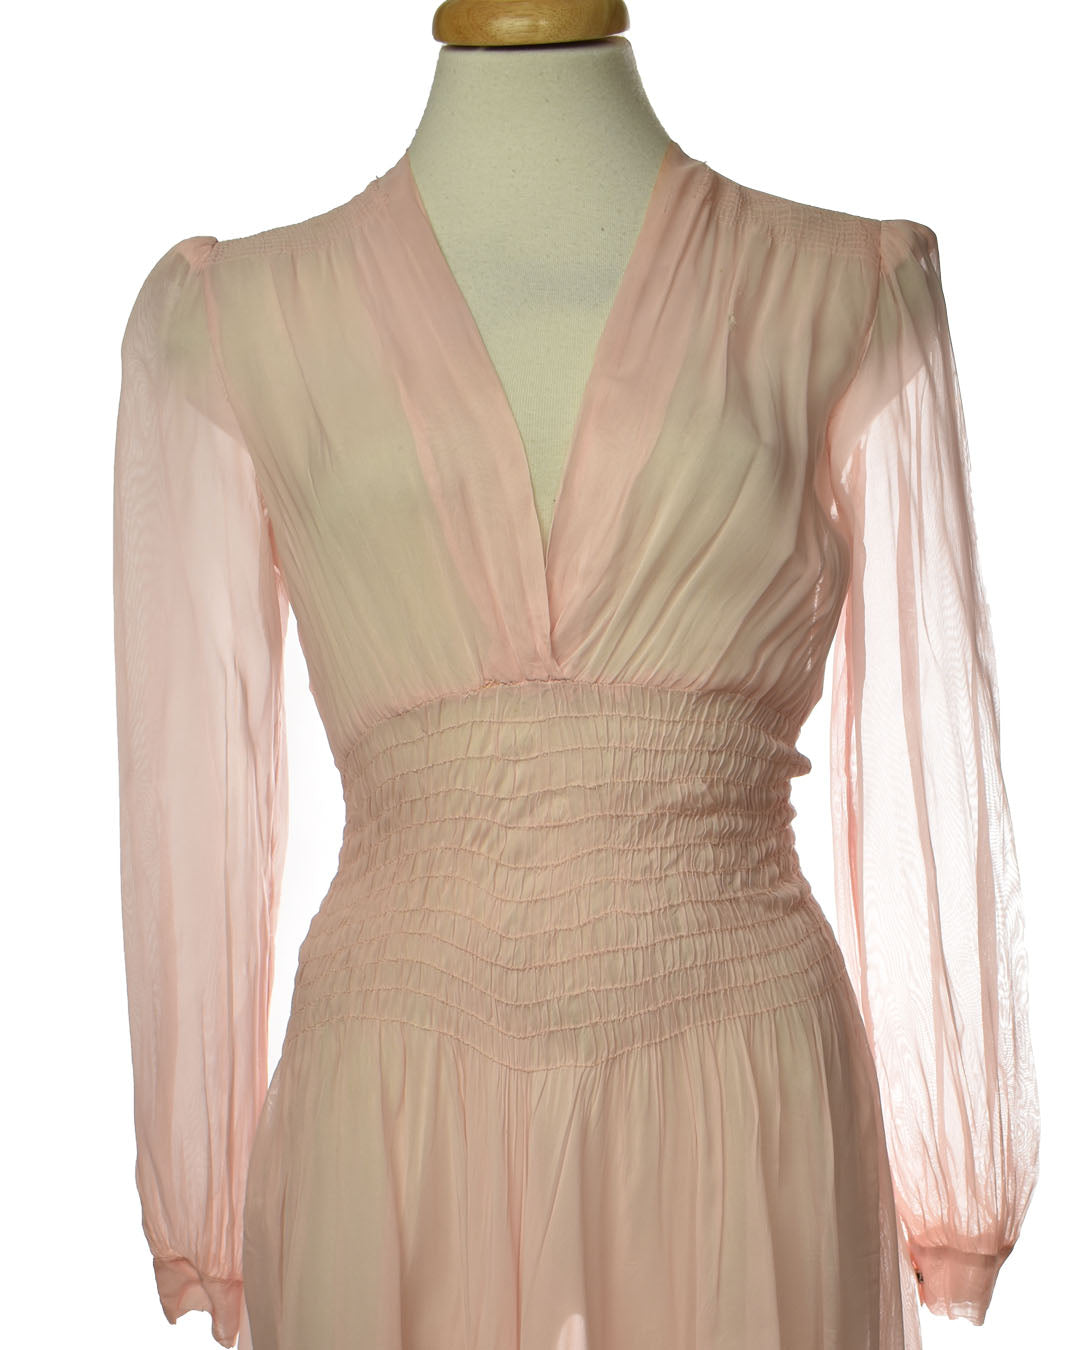 Vintage 50s Sheer Pink Ruched Waist Dress with Gorgeous Lace Trim